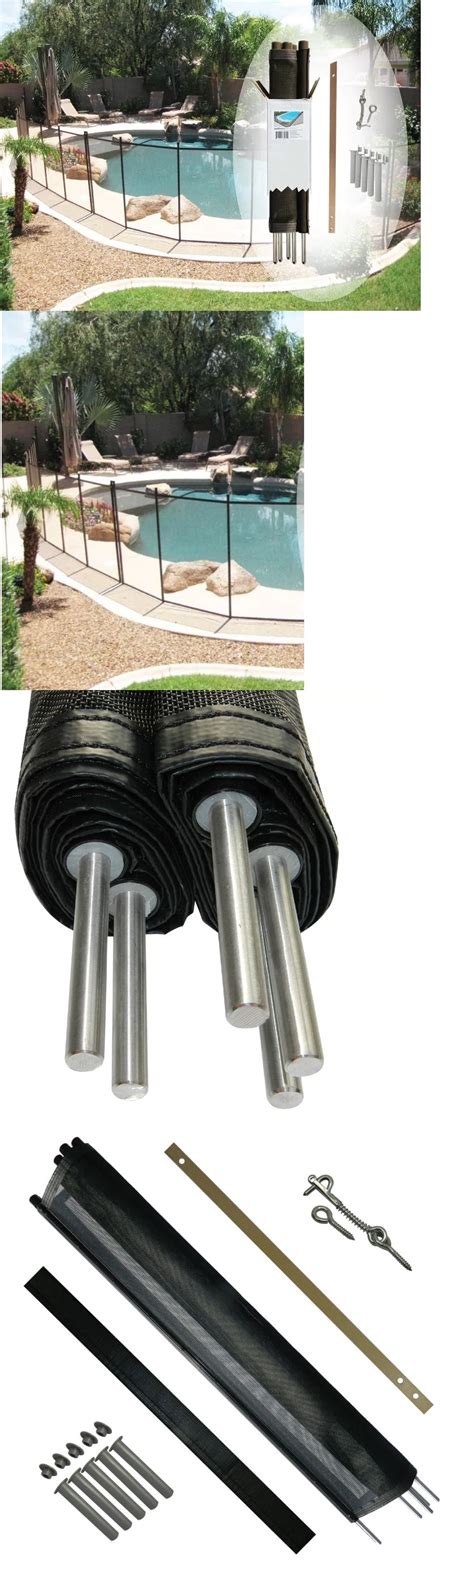 All safety experts agree that the top solution you can offer immediately by way of prevention is to install a pool safety fence. Pool Fences 167851: Swimming Pool Safety Fence In Ground 4 X 12 Diy Panel Black Sturdy Mesh New ...